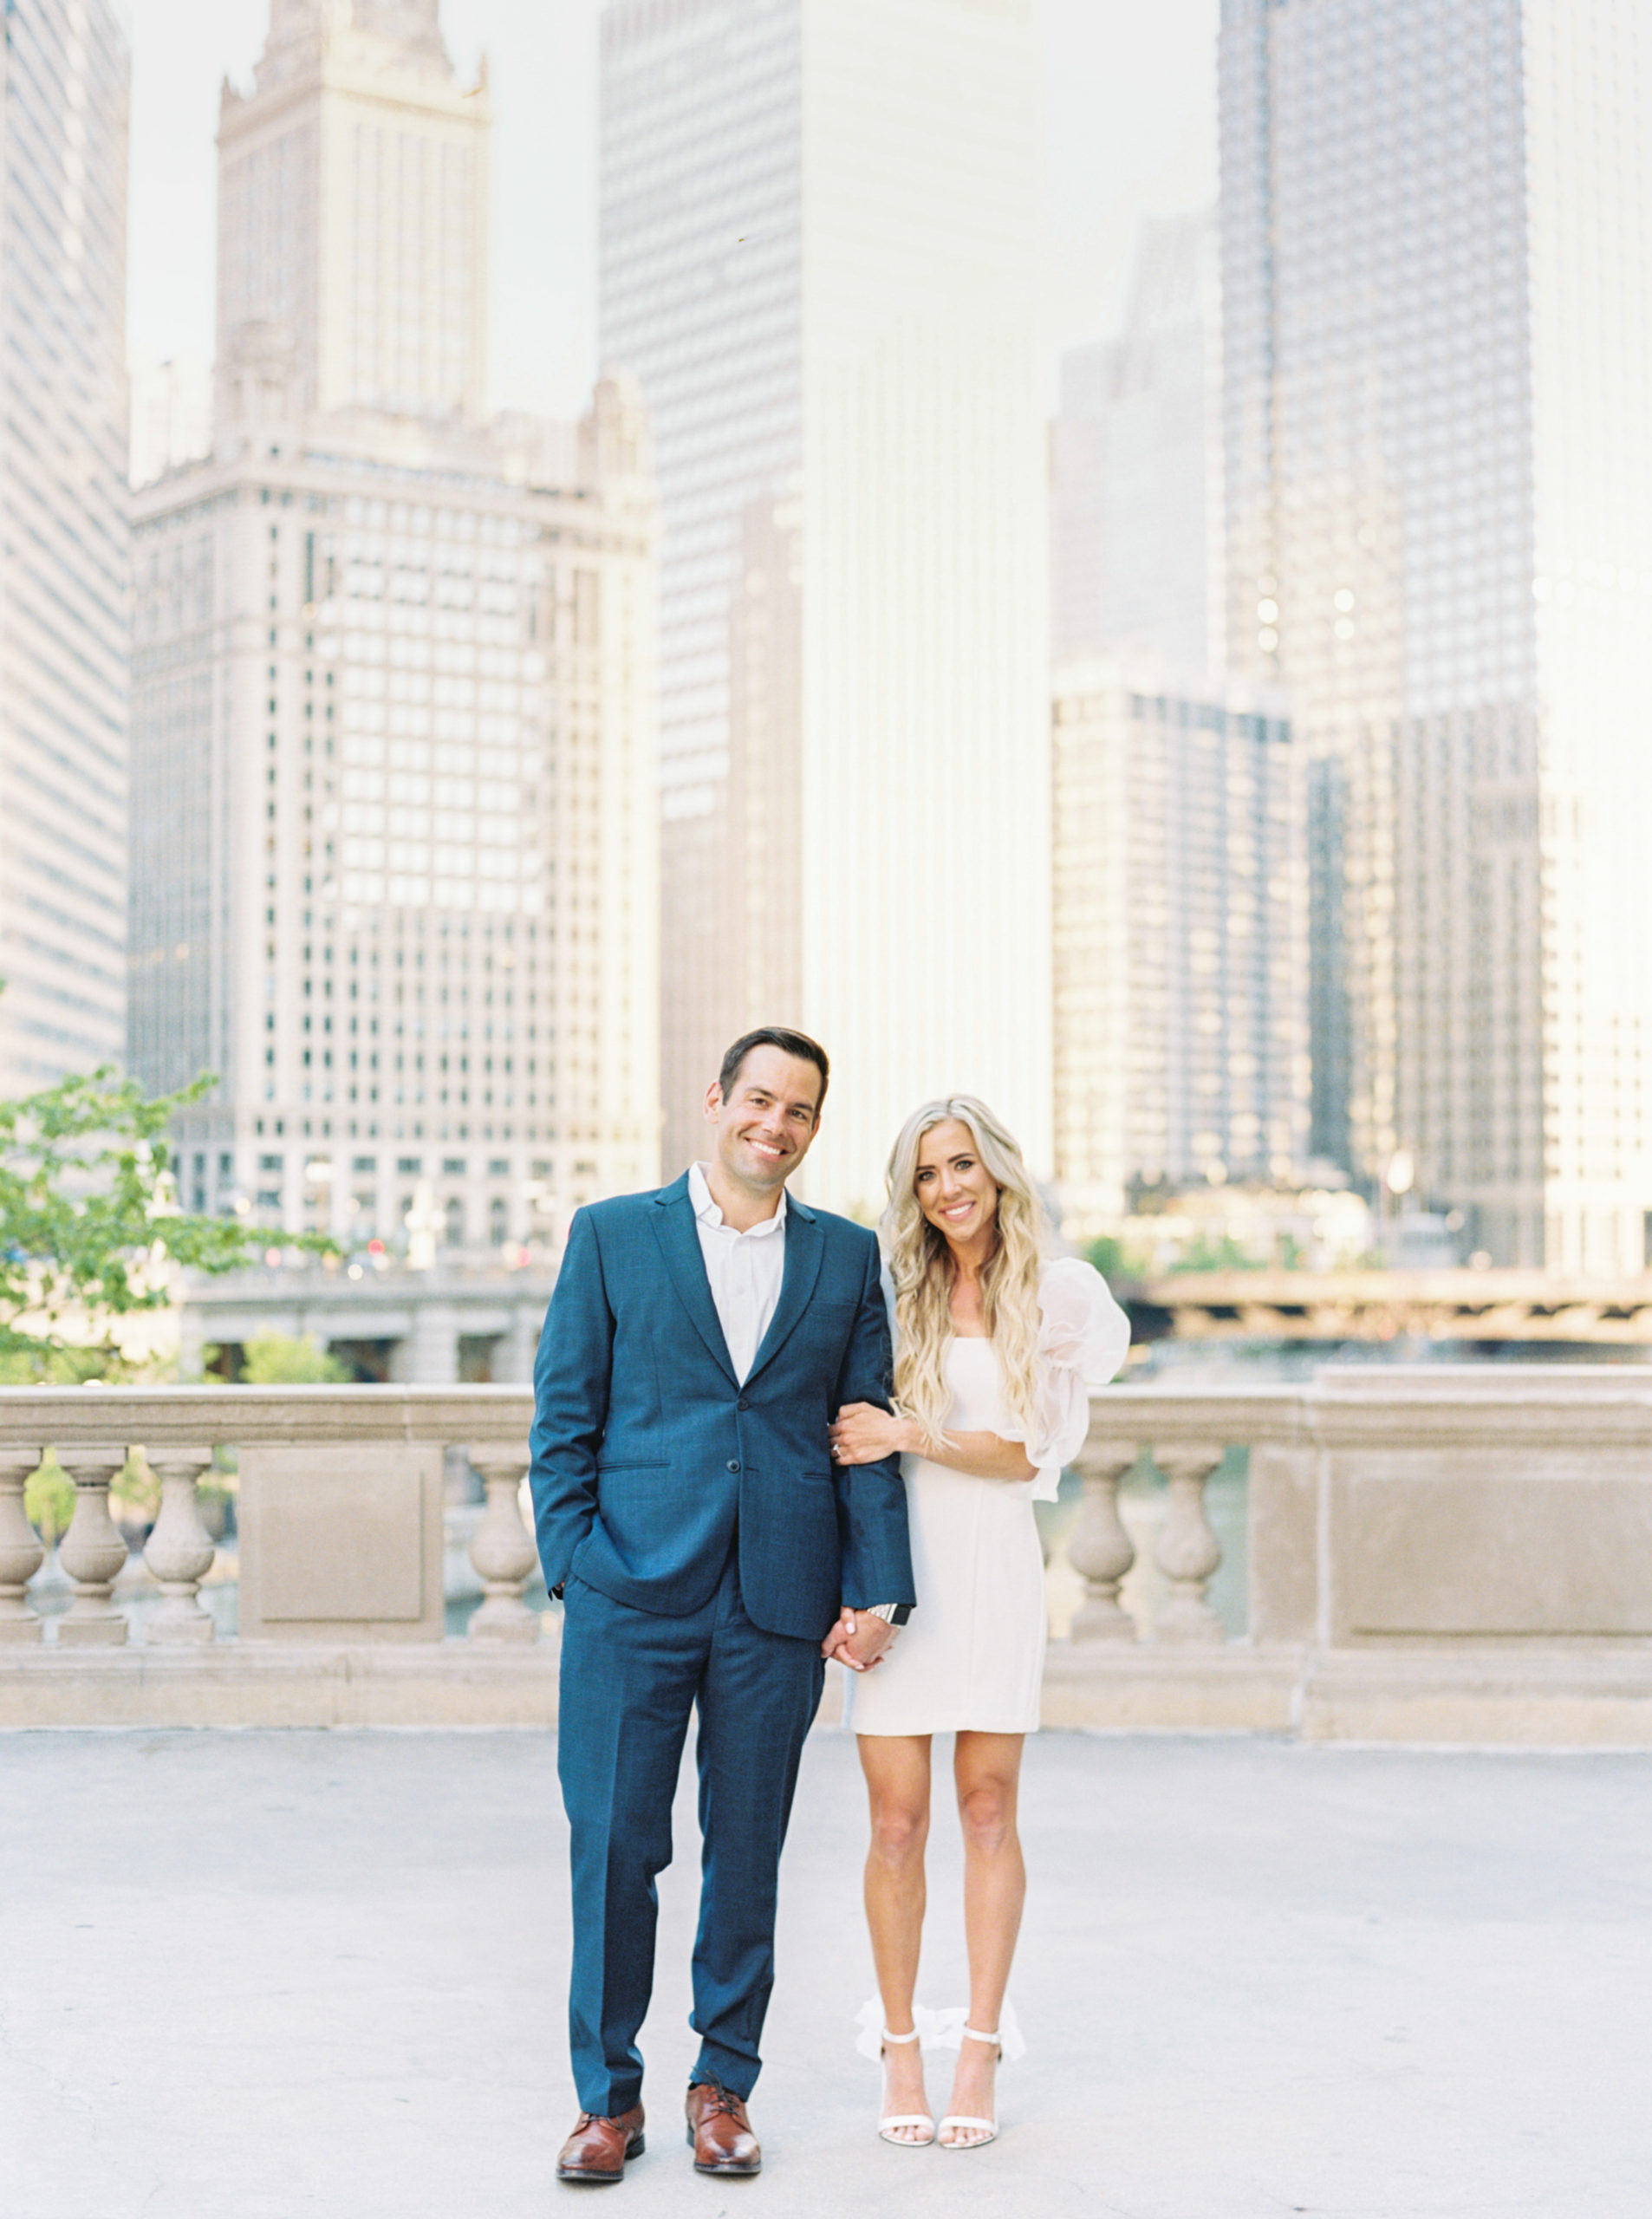 Engaged couple pose in front of a stunning view of the Chicago skyline during their classy upscale engagement session shot by Mackenzie Reiter